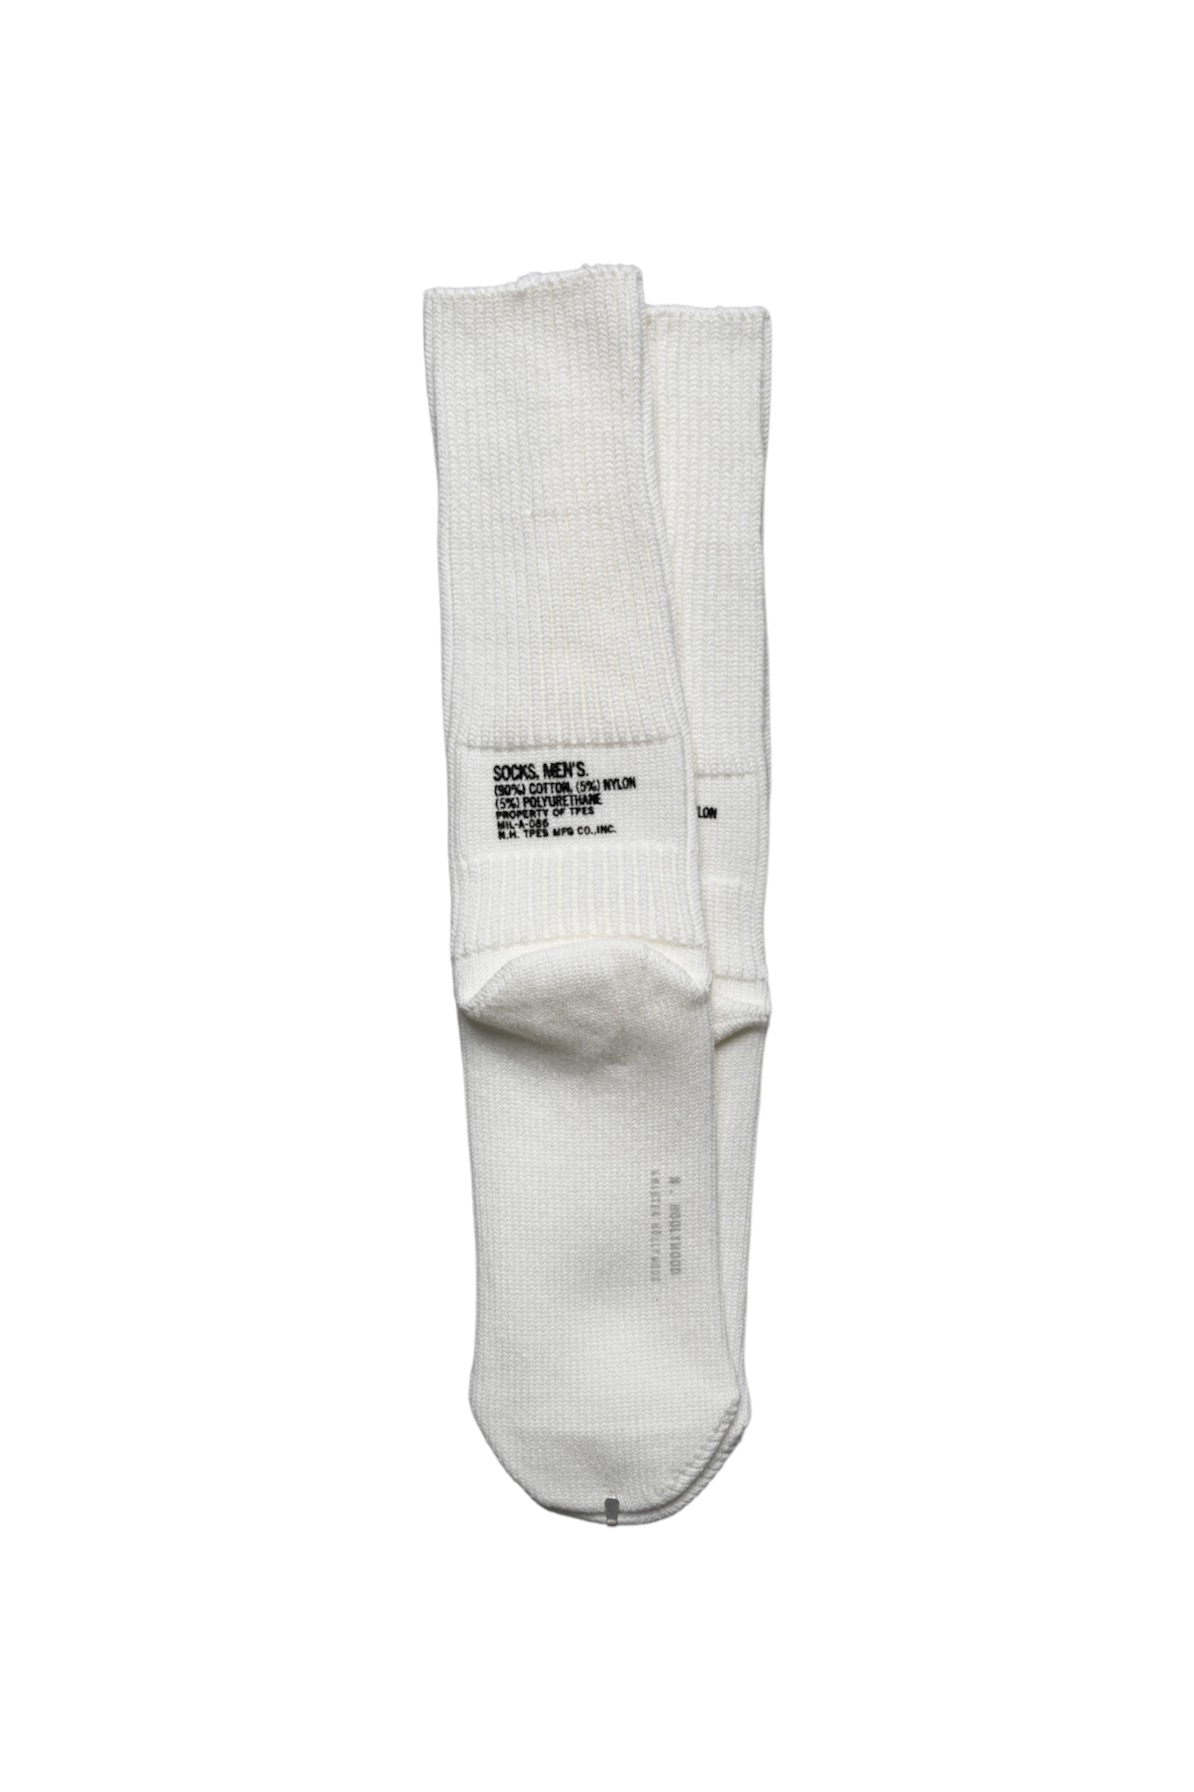 From N. Hoolywod are crew length Ribbed socks. Milspec printed on the back, it is visible when you put on short shoes. Made of cotton which has crude texture. 90% cotton, 5% nylon, 5% polyurethane. Made In Japan 